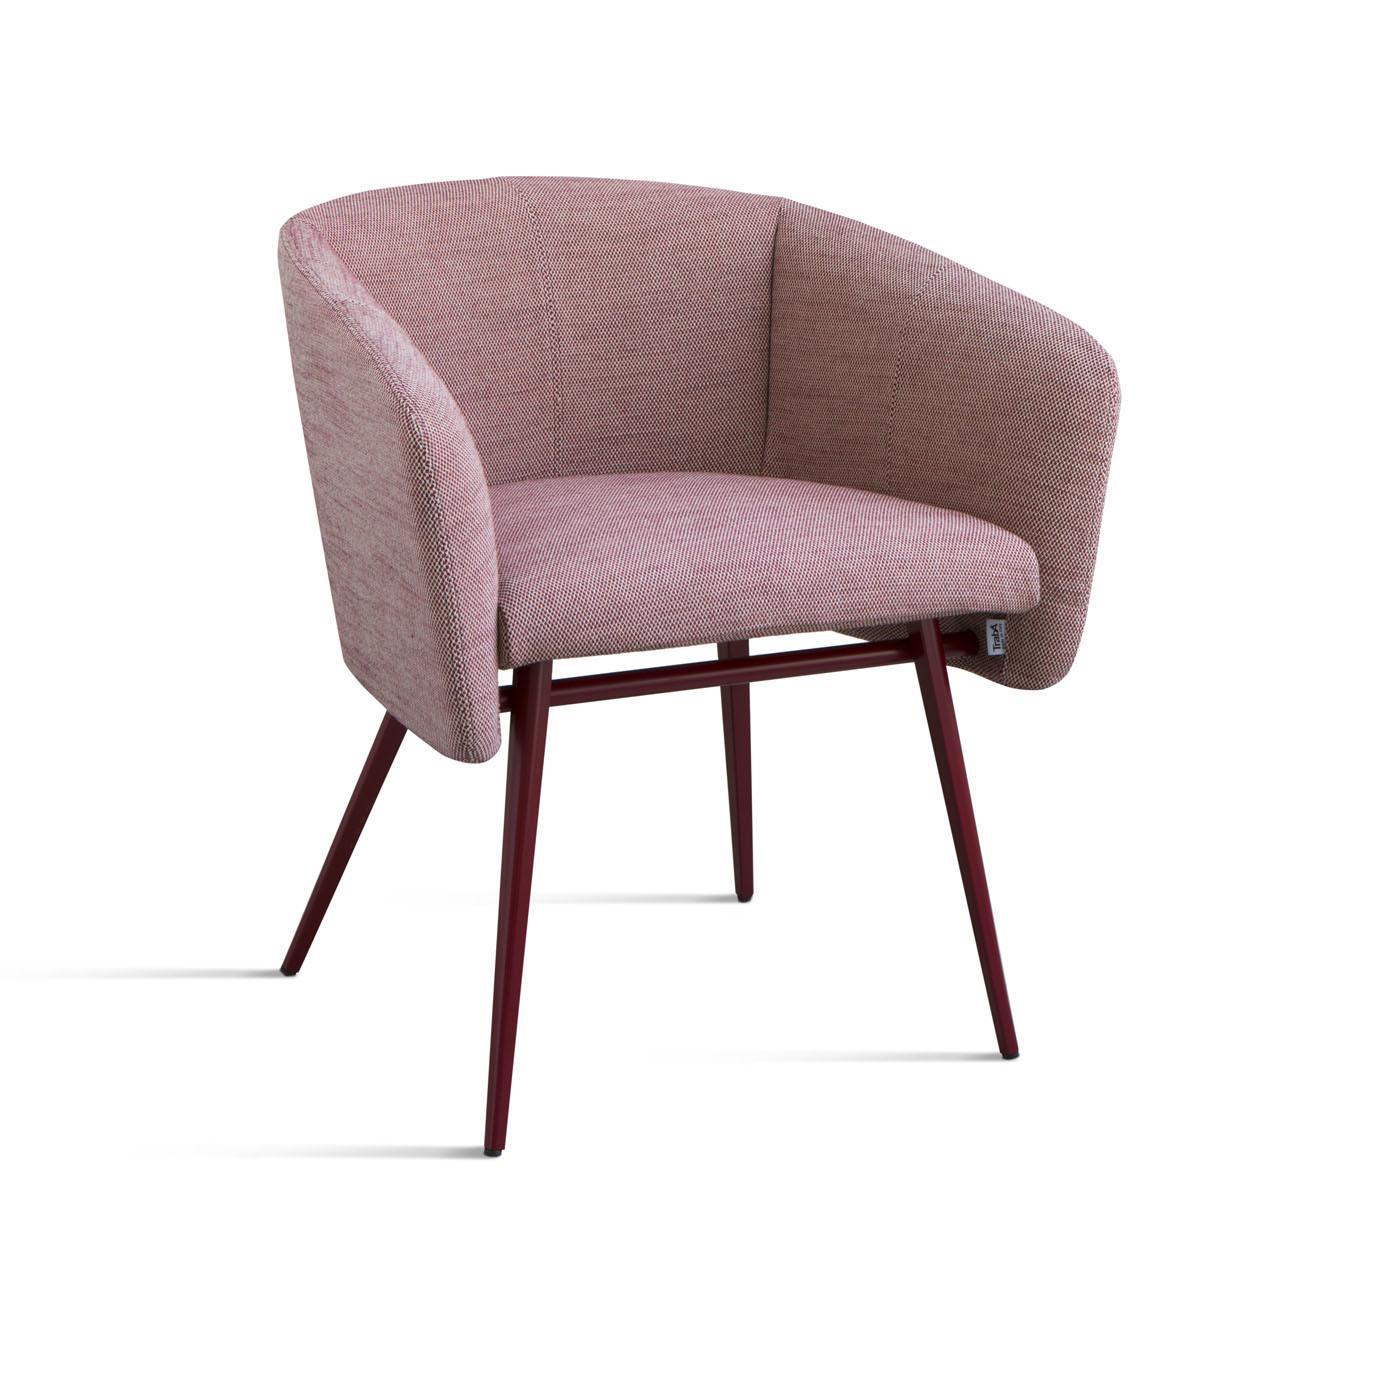 Welcoming and comfortable, elegant and generous, this piece is reminiscent of the traditional tub chair. Its clean and sophisticated design combines a striking structure in red-lacquered beechwood with slim, slanted legs, adding a dynamic profile to